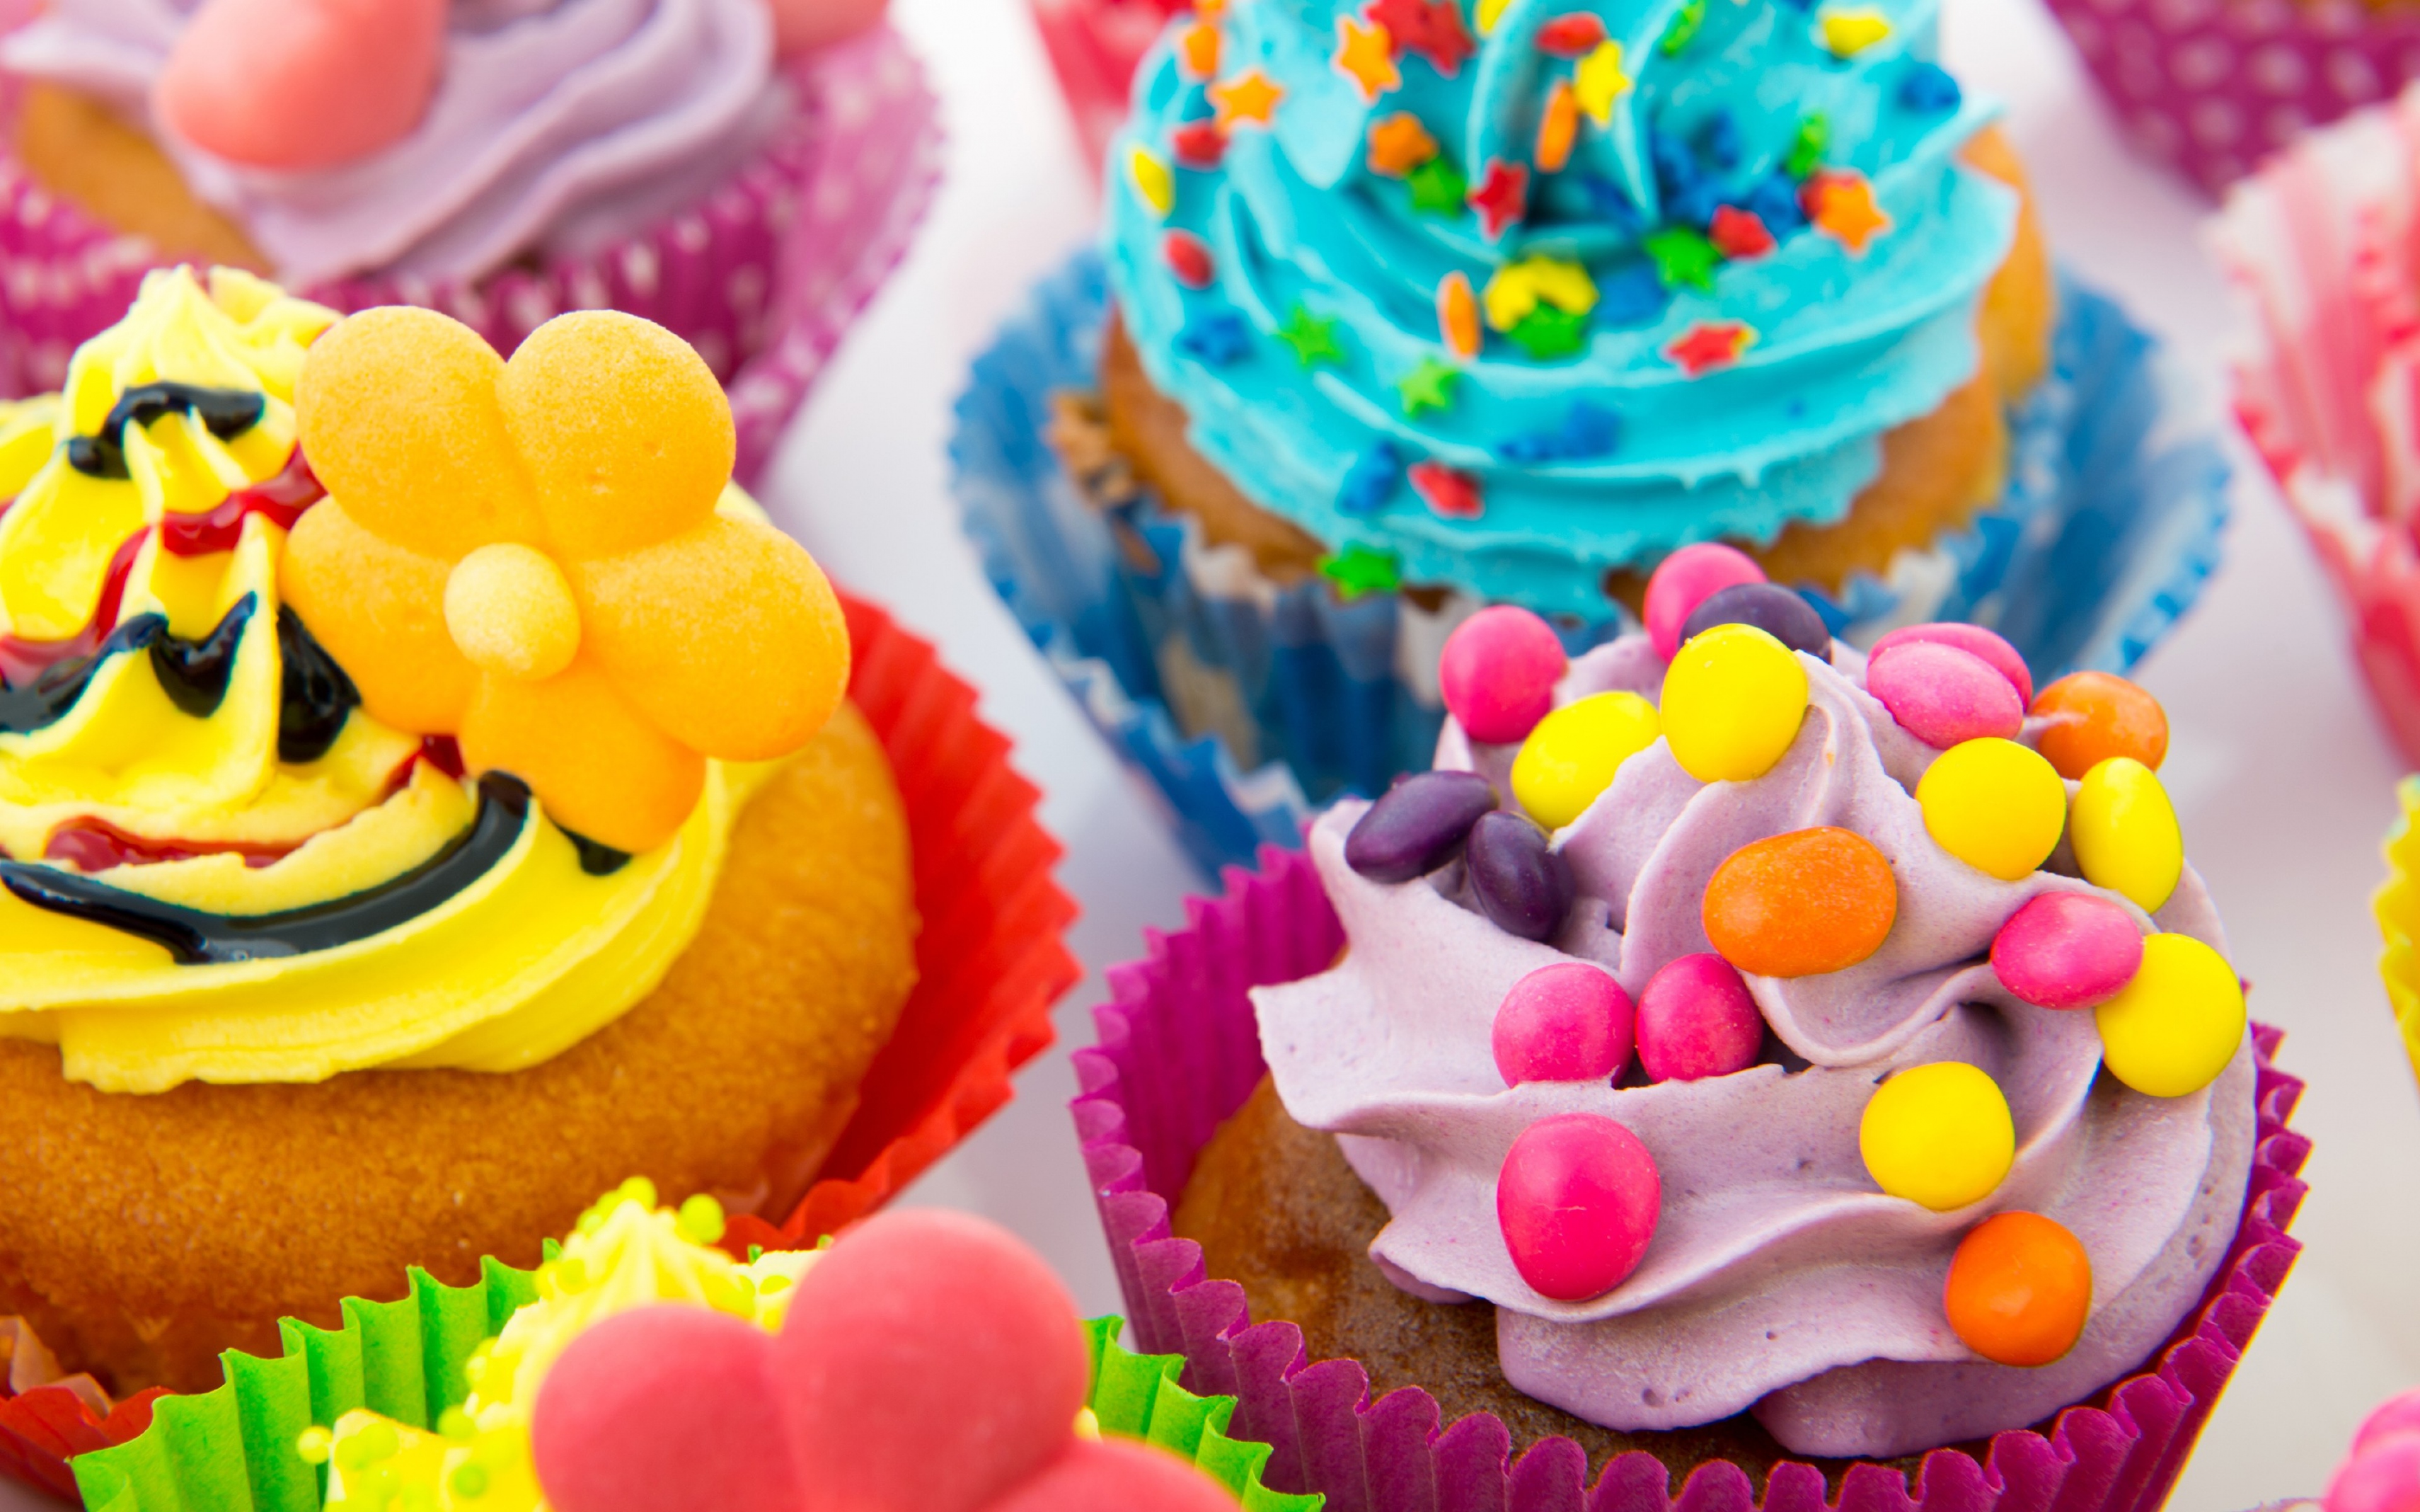 Download Wallpaper 3840x2400 Cake, Cream, Sweet, Sweets, Candy ...